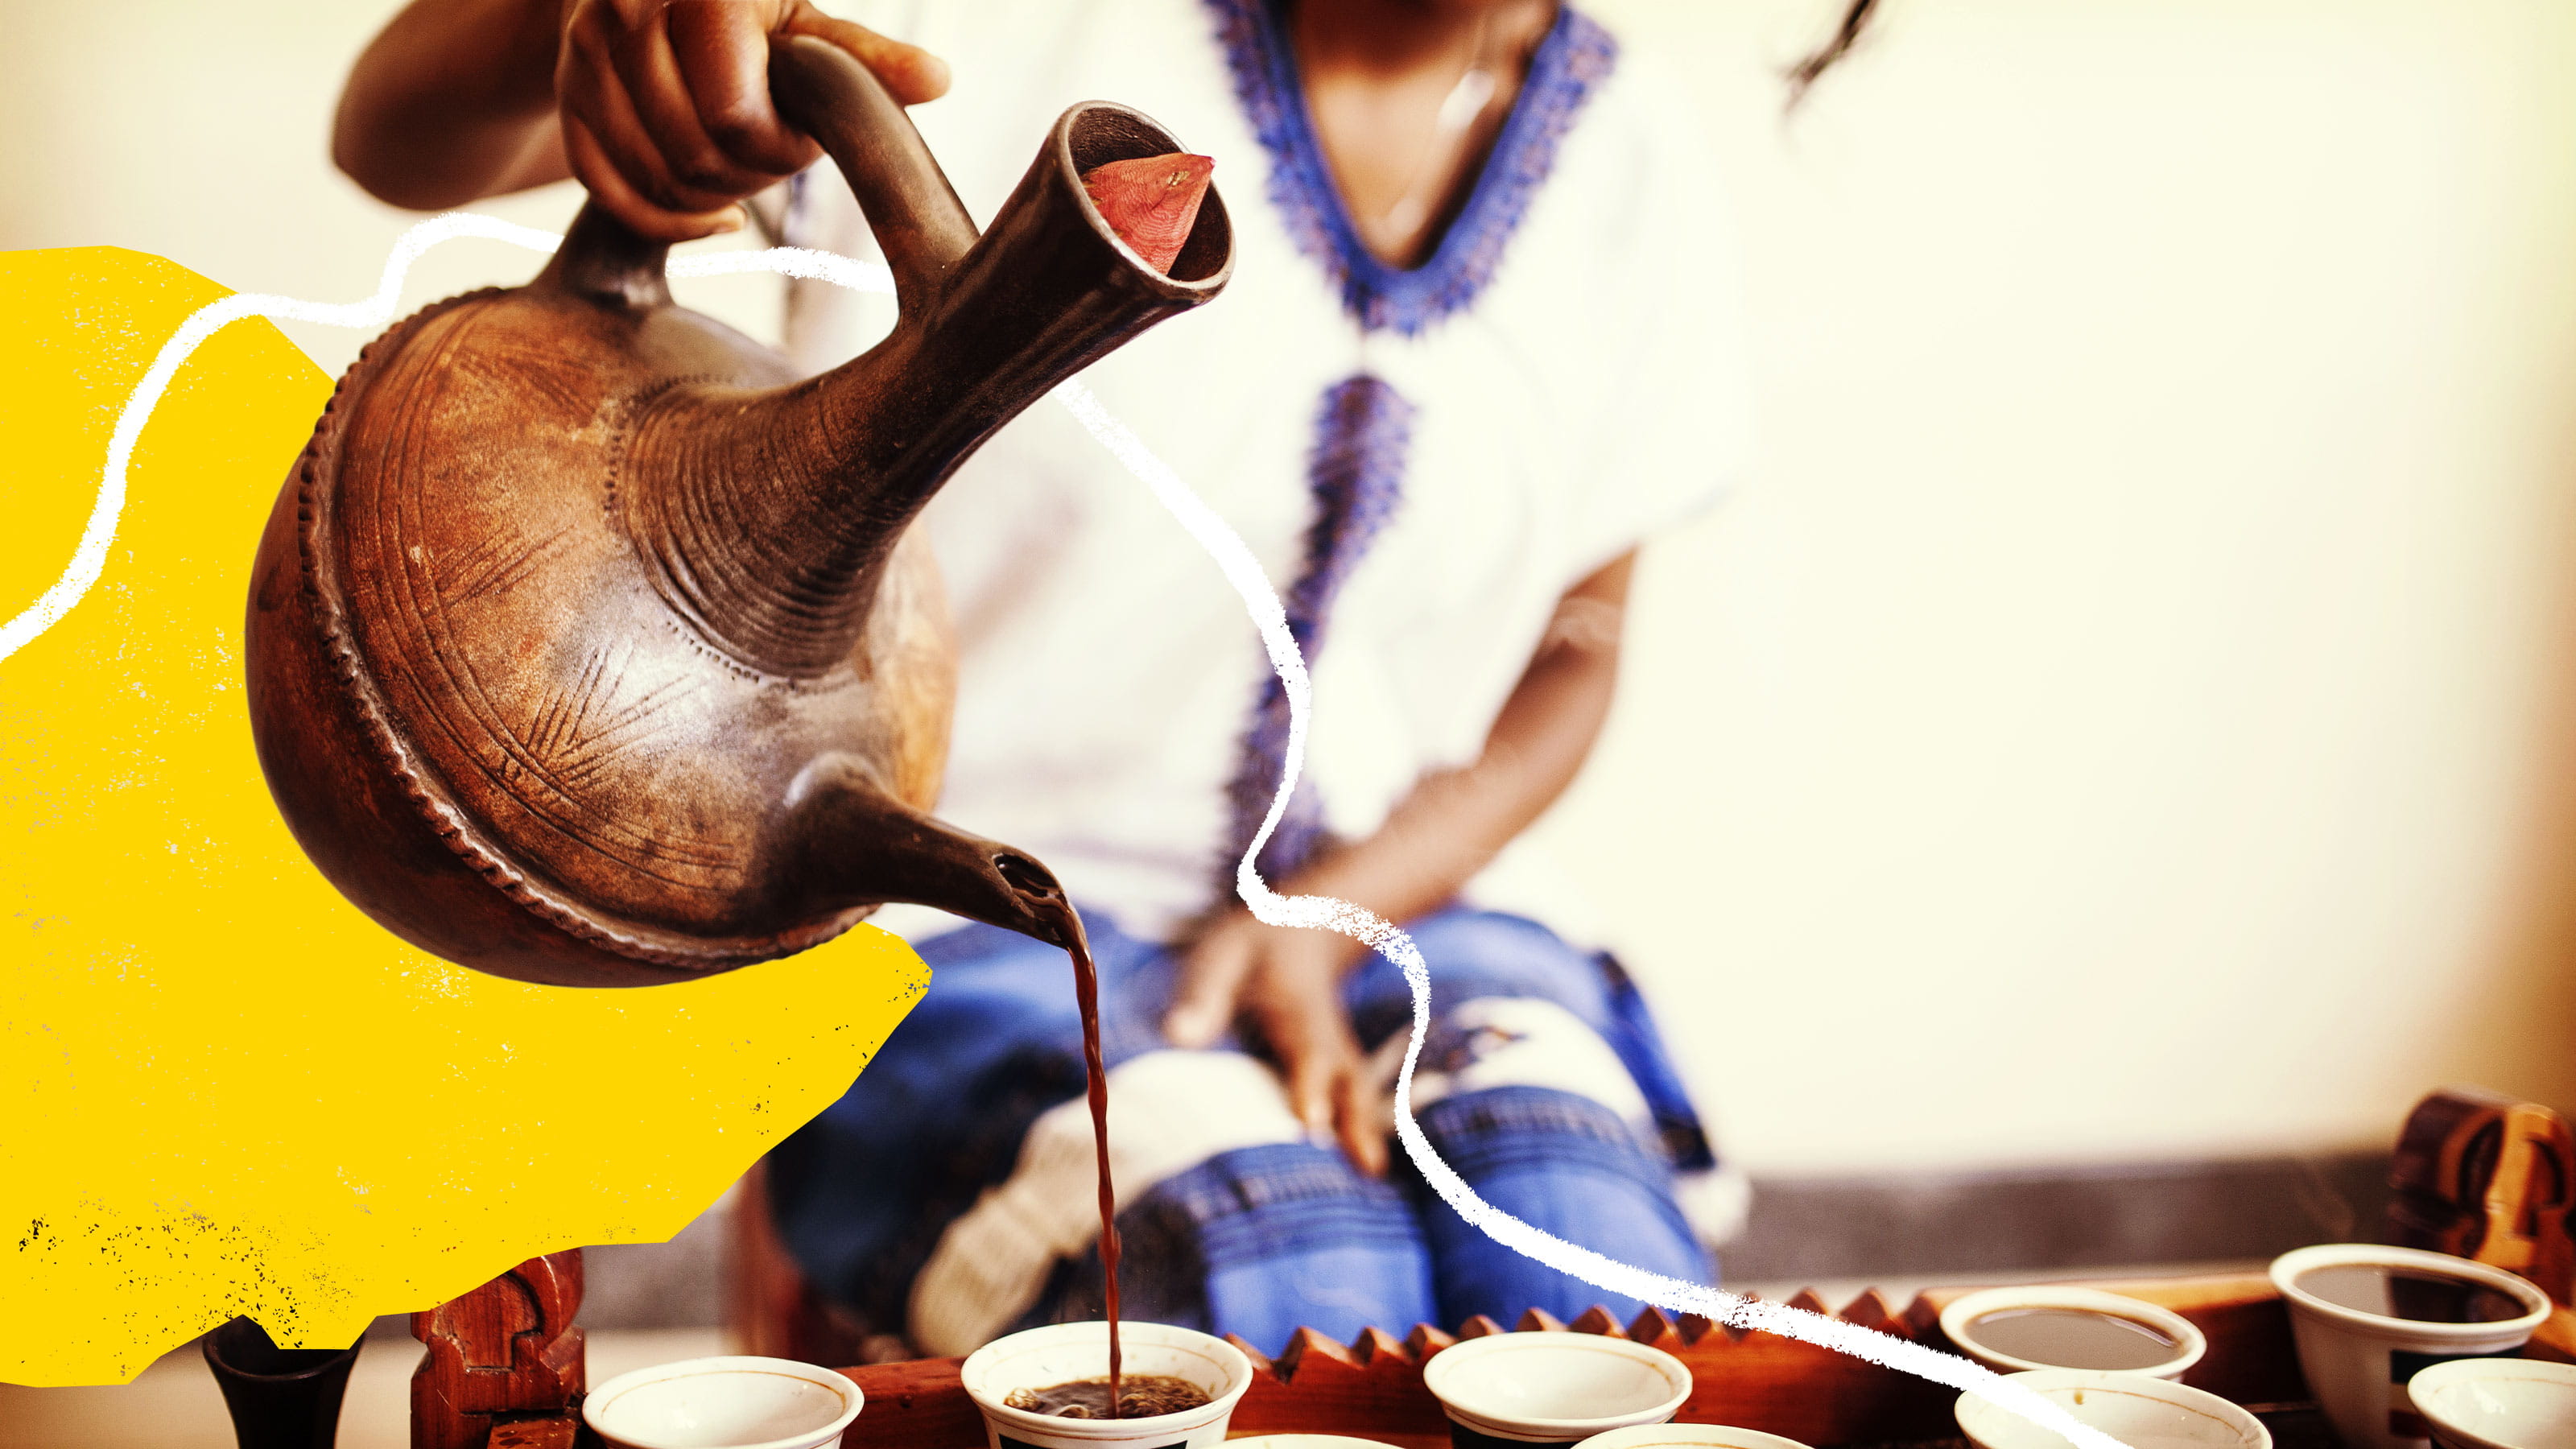 Someone out of focus pours coffee out of an Ethiopian coffee pot into cups